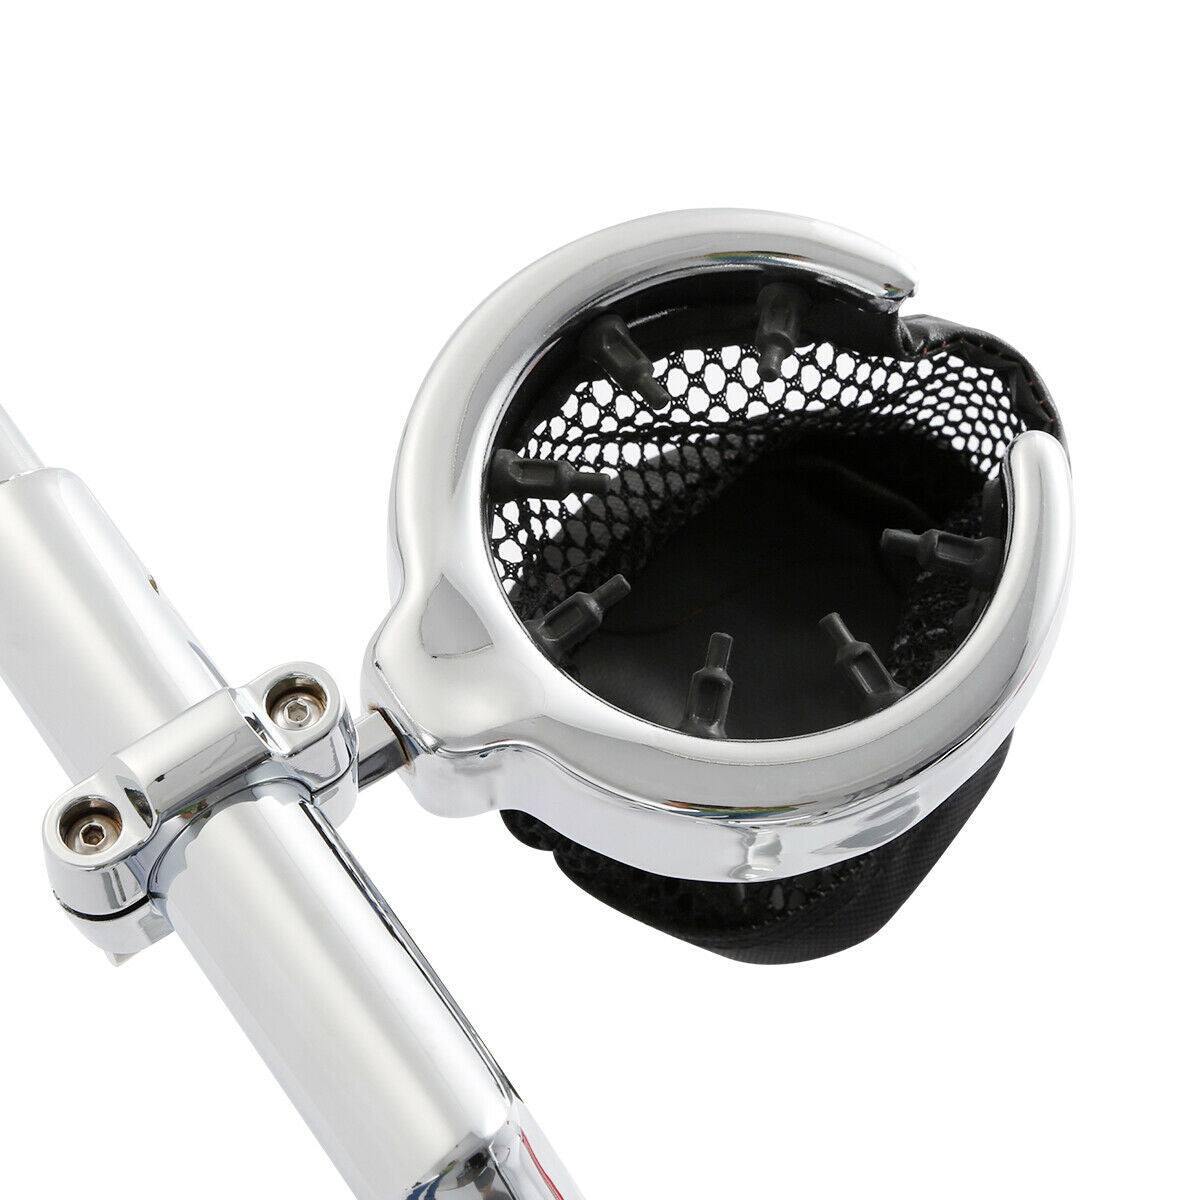 Universal Motorcycle Handlebar Cup Holder Chrome Drink Basket Fit For Harley - Moto Life Products